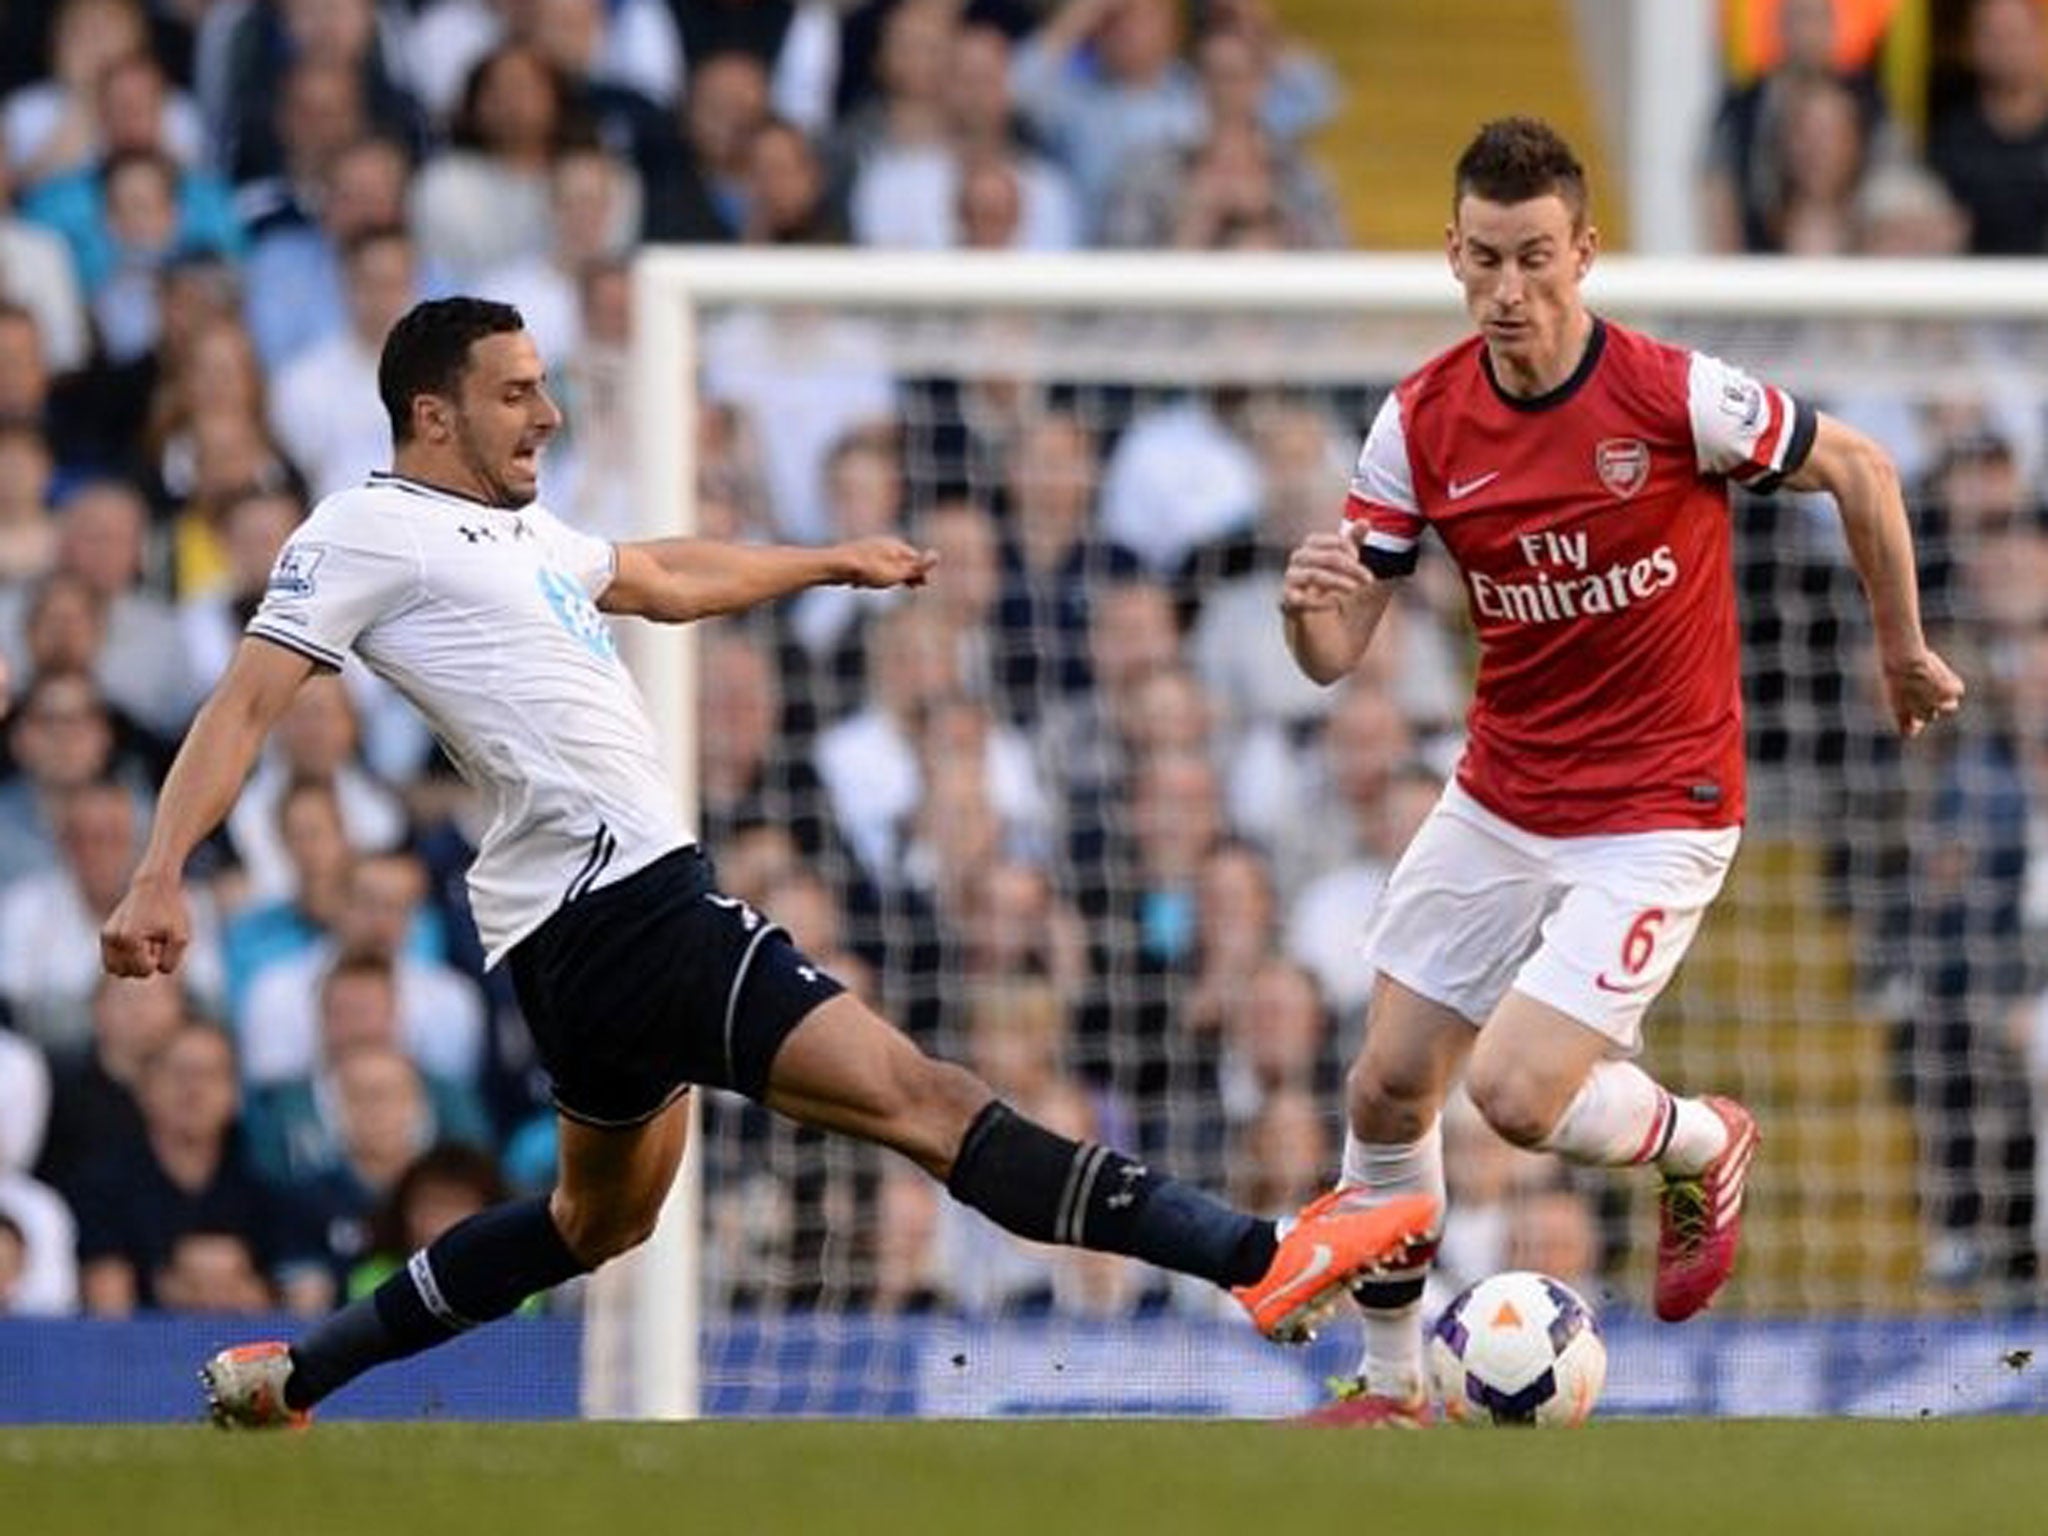 Laurent Koscielny has committed to a long-term deal with Arsenal